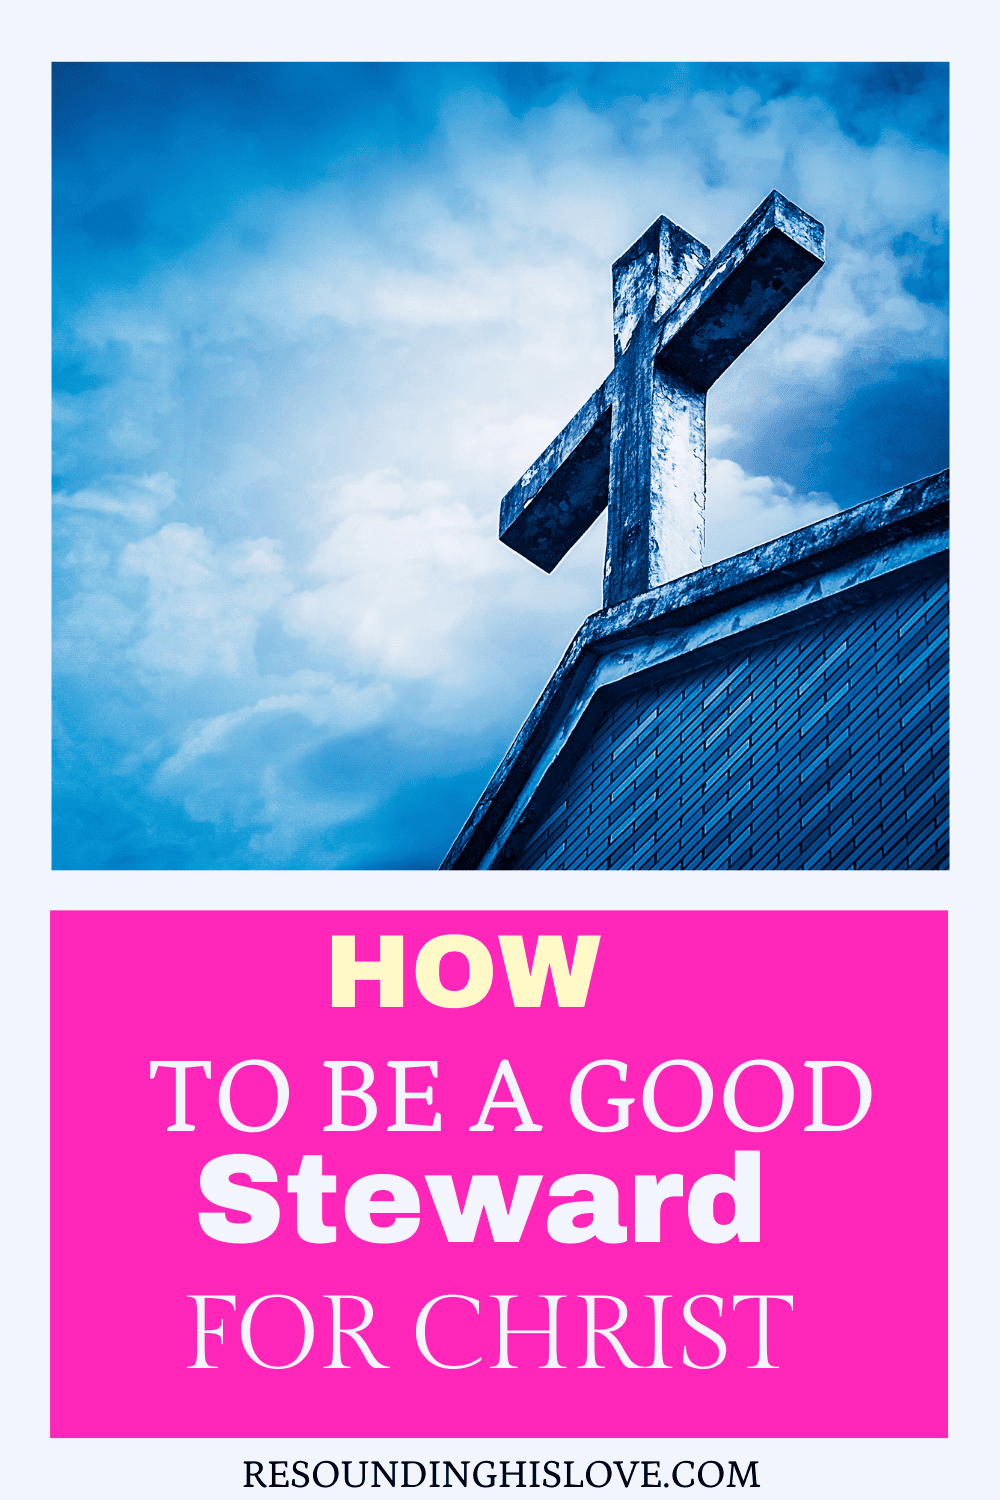 a church steeple with a cross on top with text How to Be a Good Steward for Christ